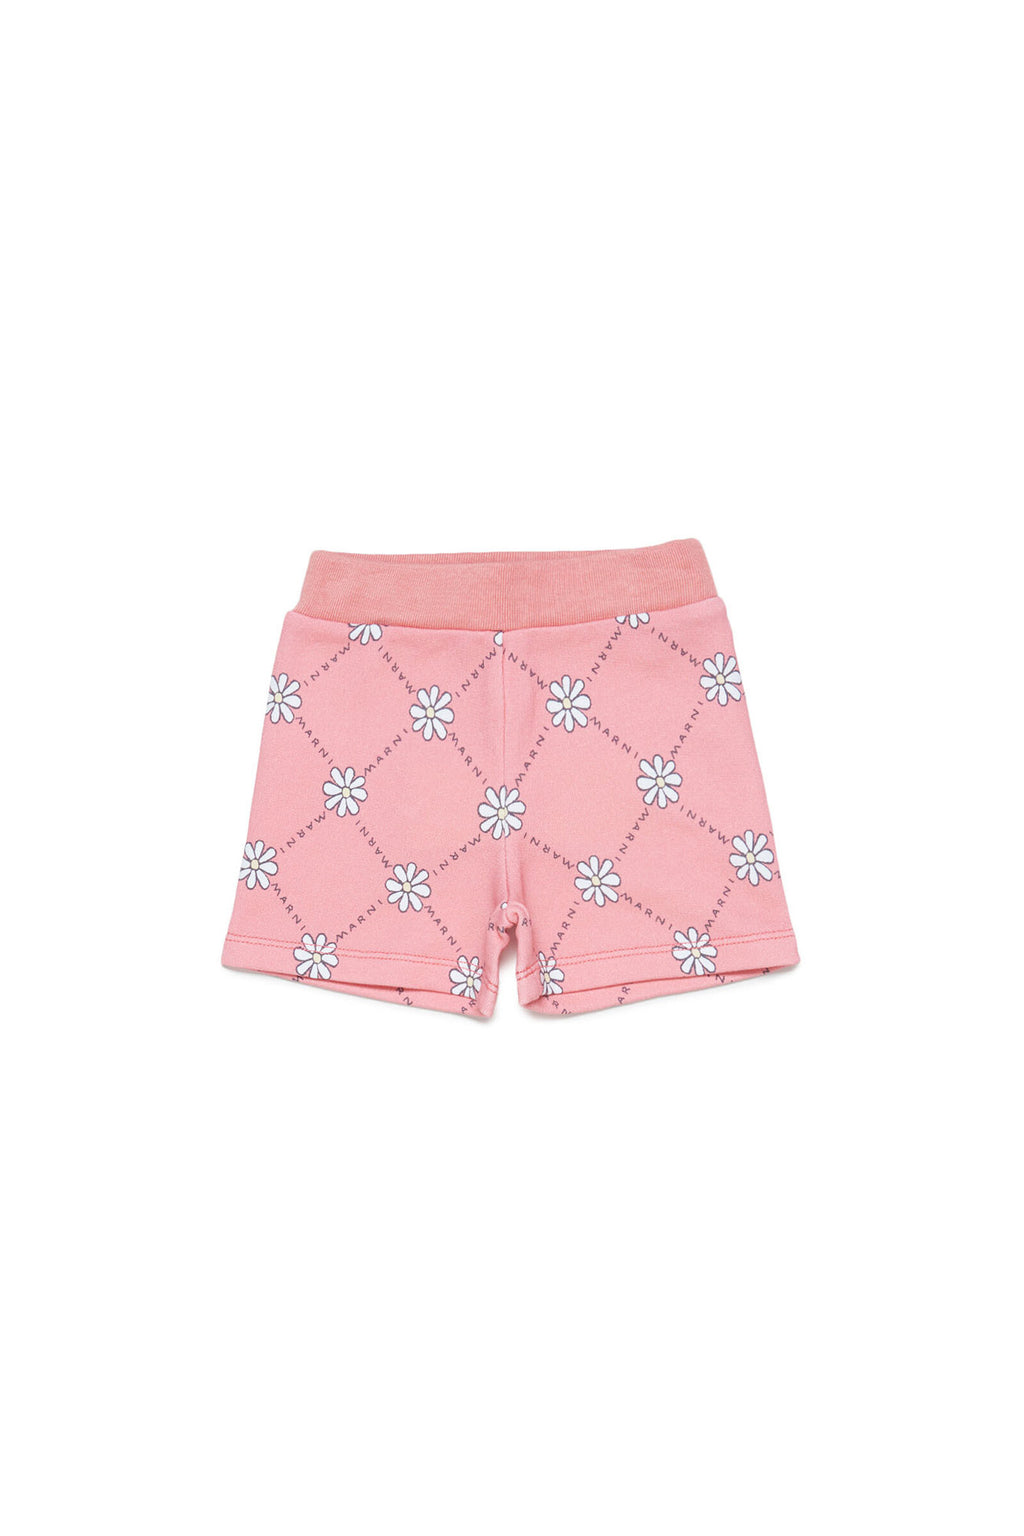 Peach pink cotton shorts with daisy pattern